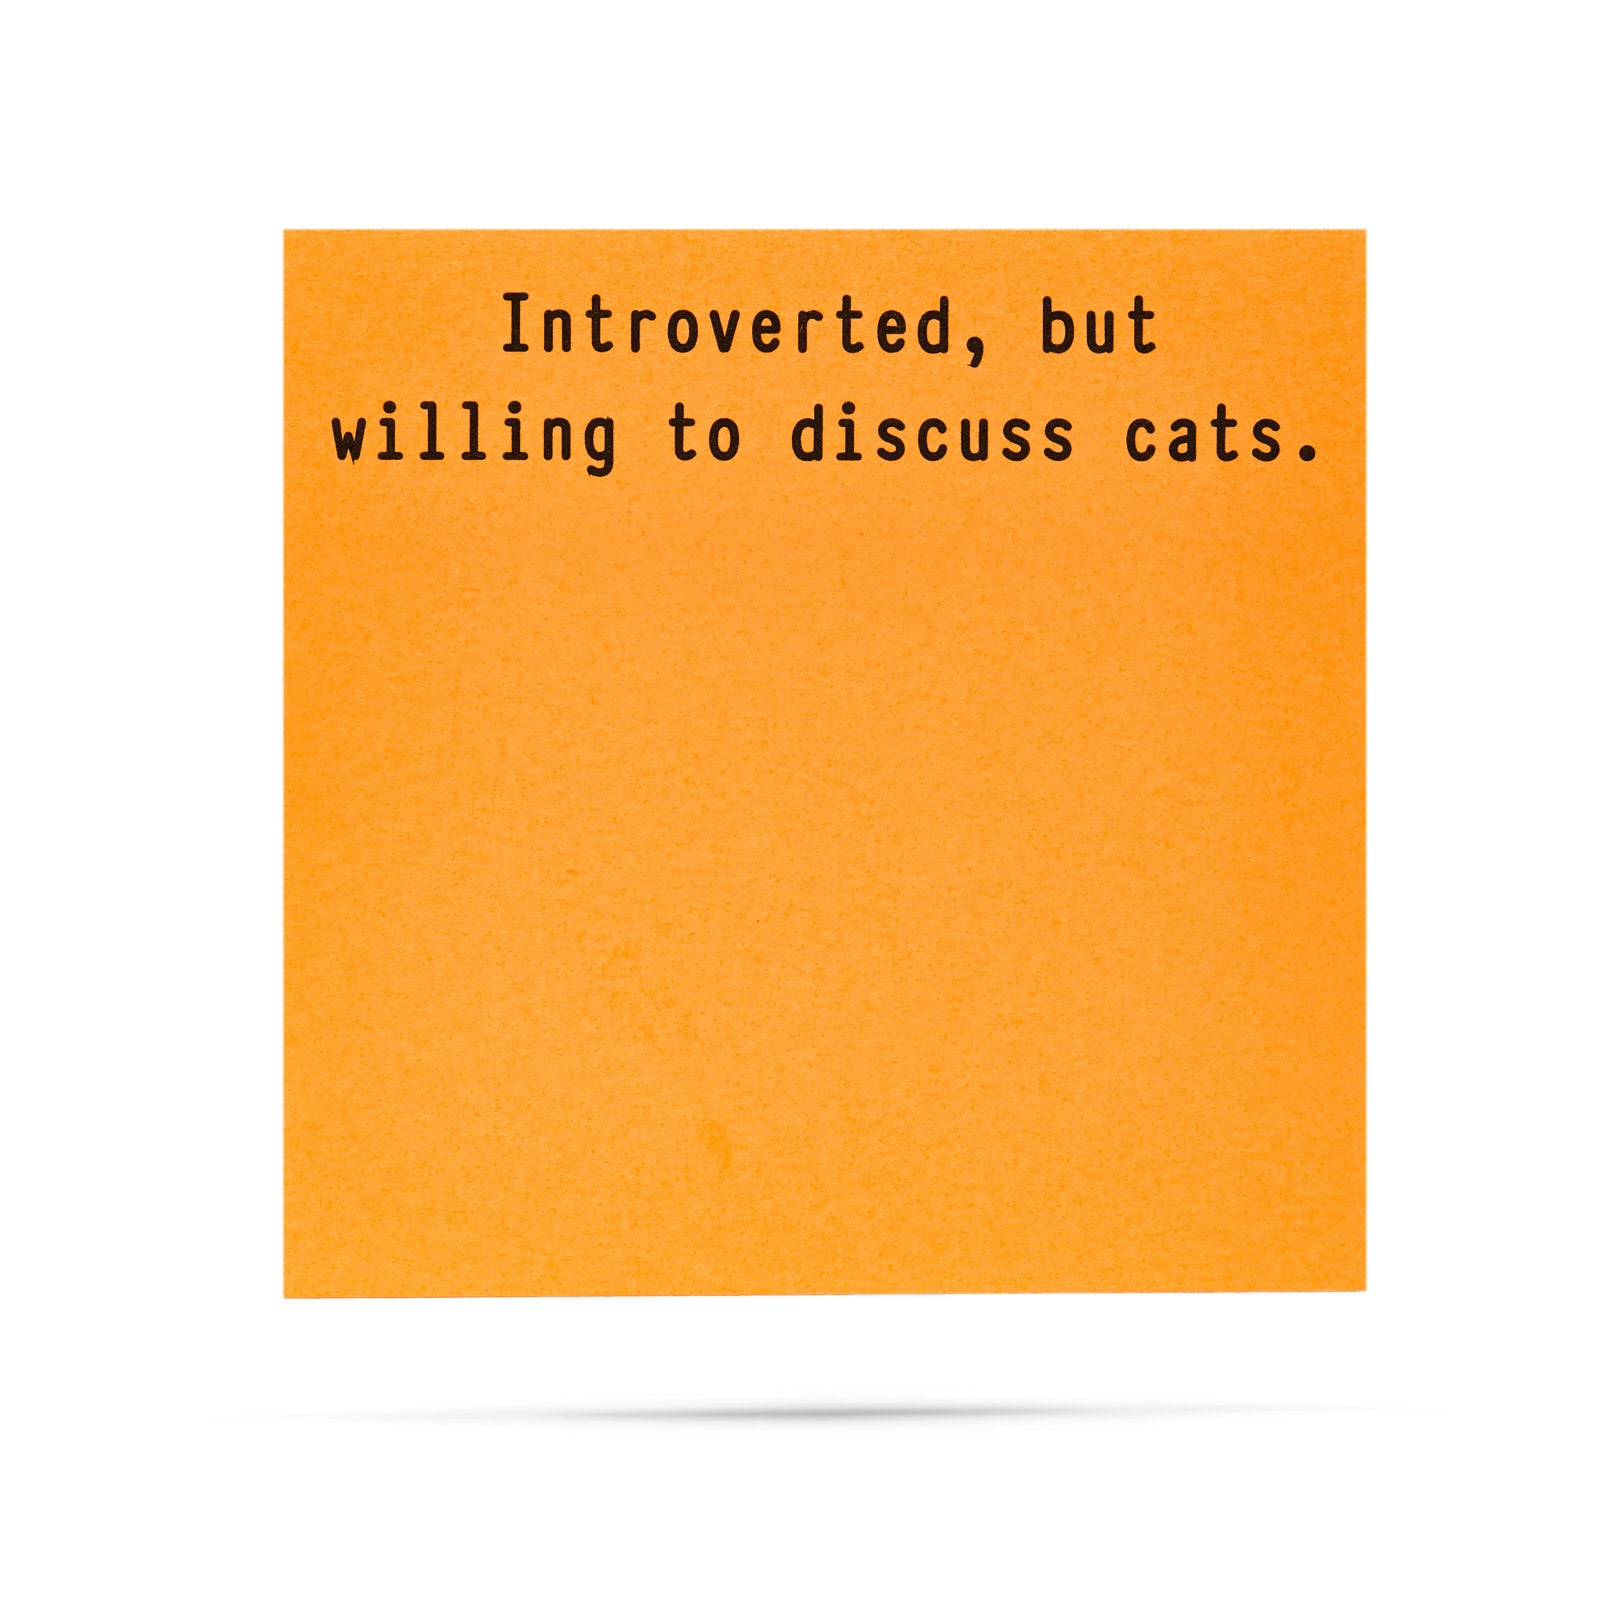 Introverted, but willing to discuss cats. 100 sheet sticky note pad